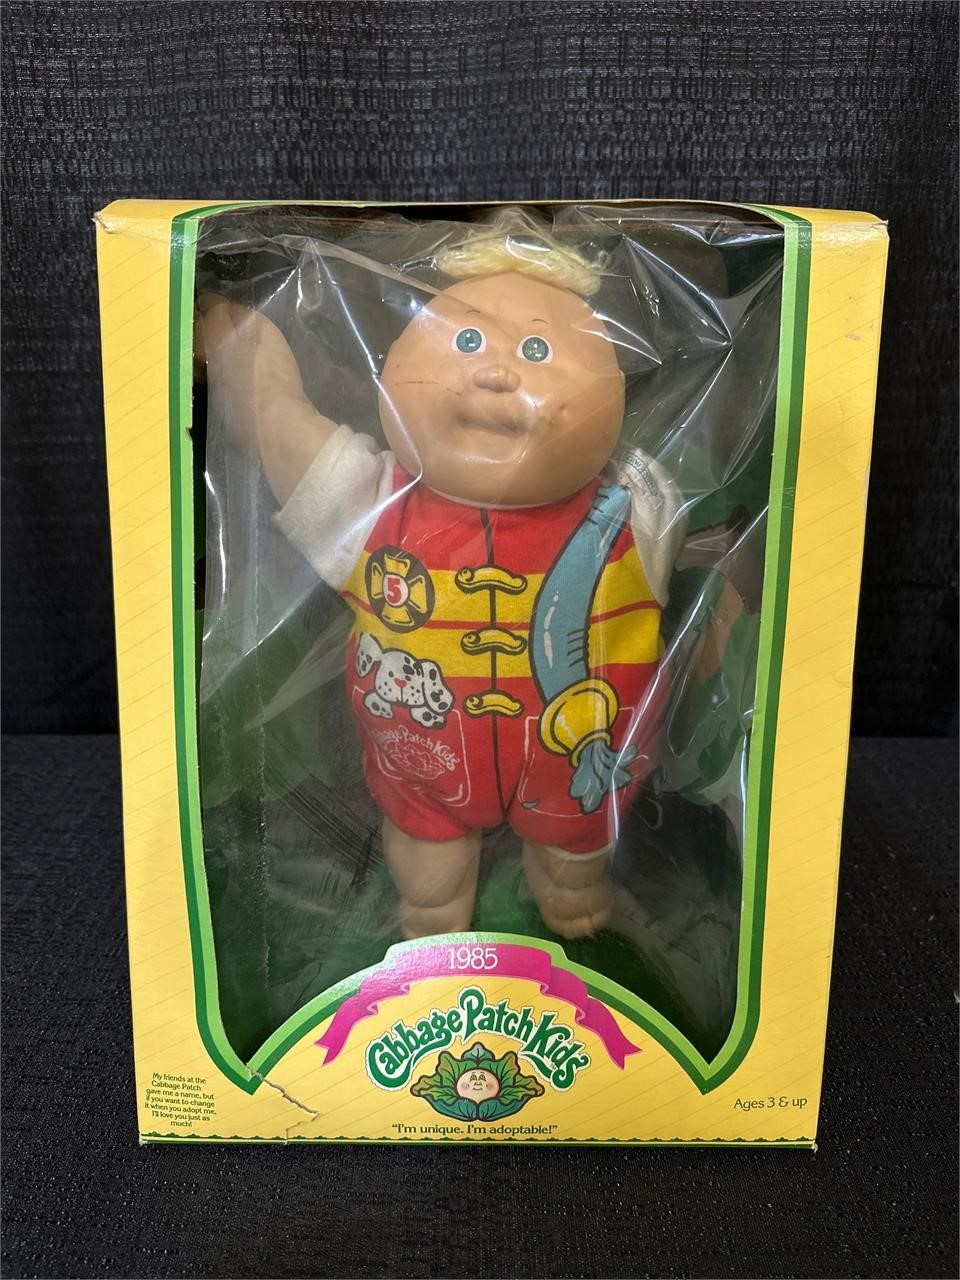 Cabbage Patch Kids 1985